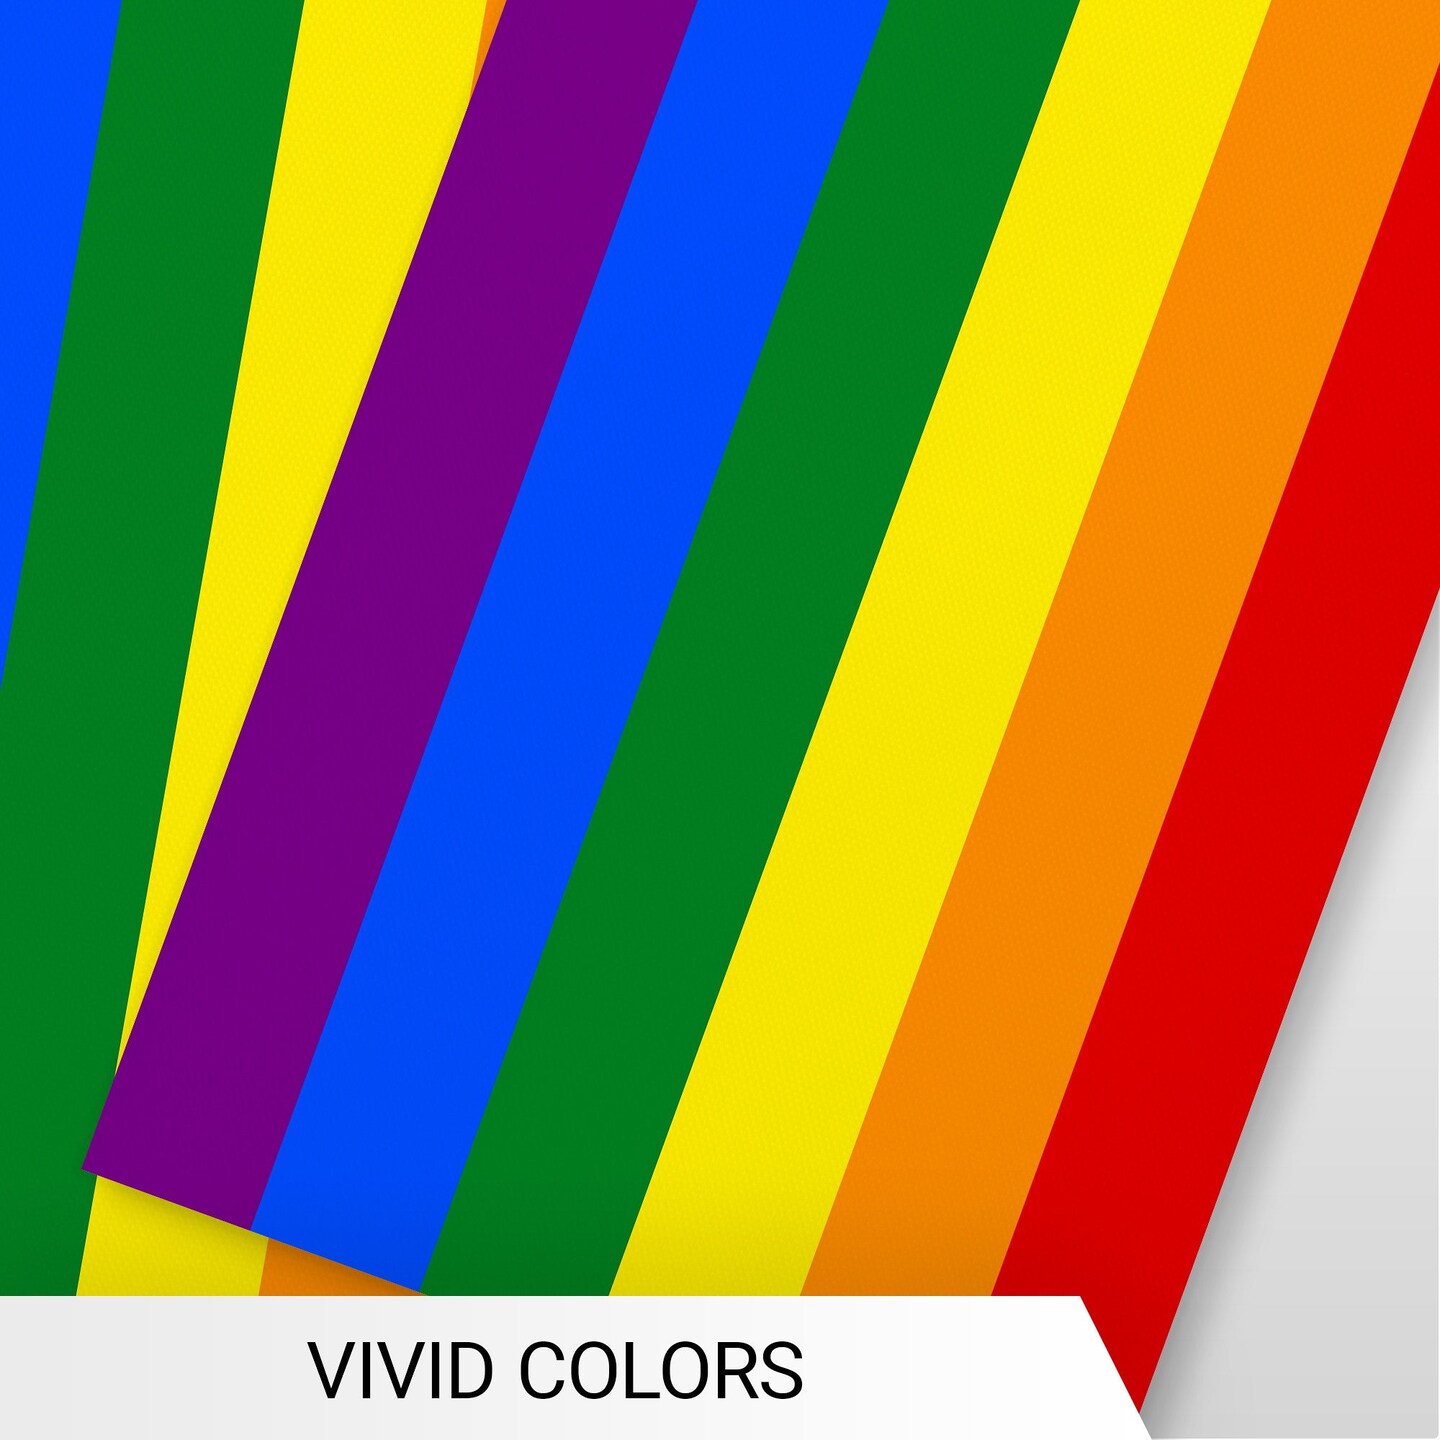 G128 LGBT Rainbow Pride Bunting Banner | Flag 8.2 x 5.5 Inch, Full String 33 Feet | Printed 150D Polyester, Decorations For Bar, School, Festival Events Celebration